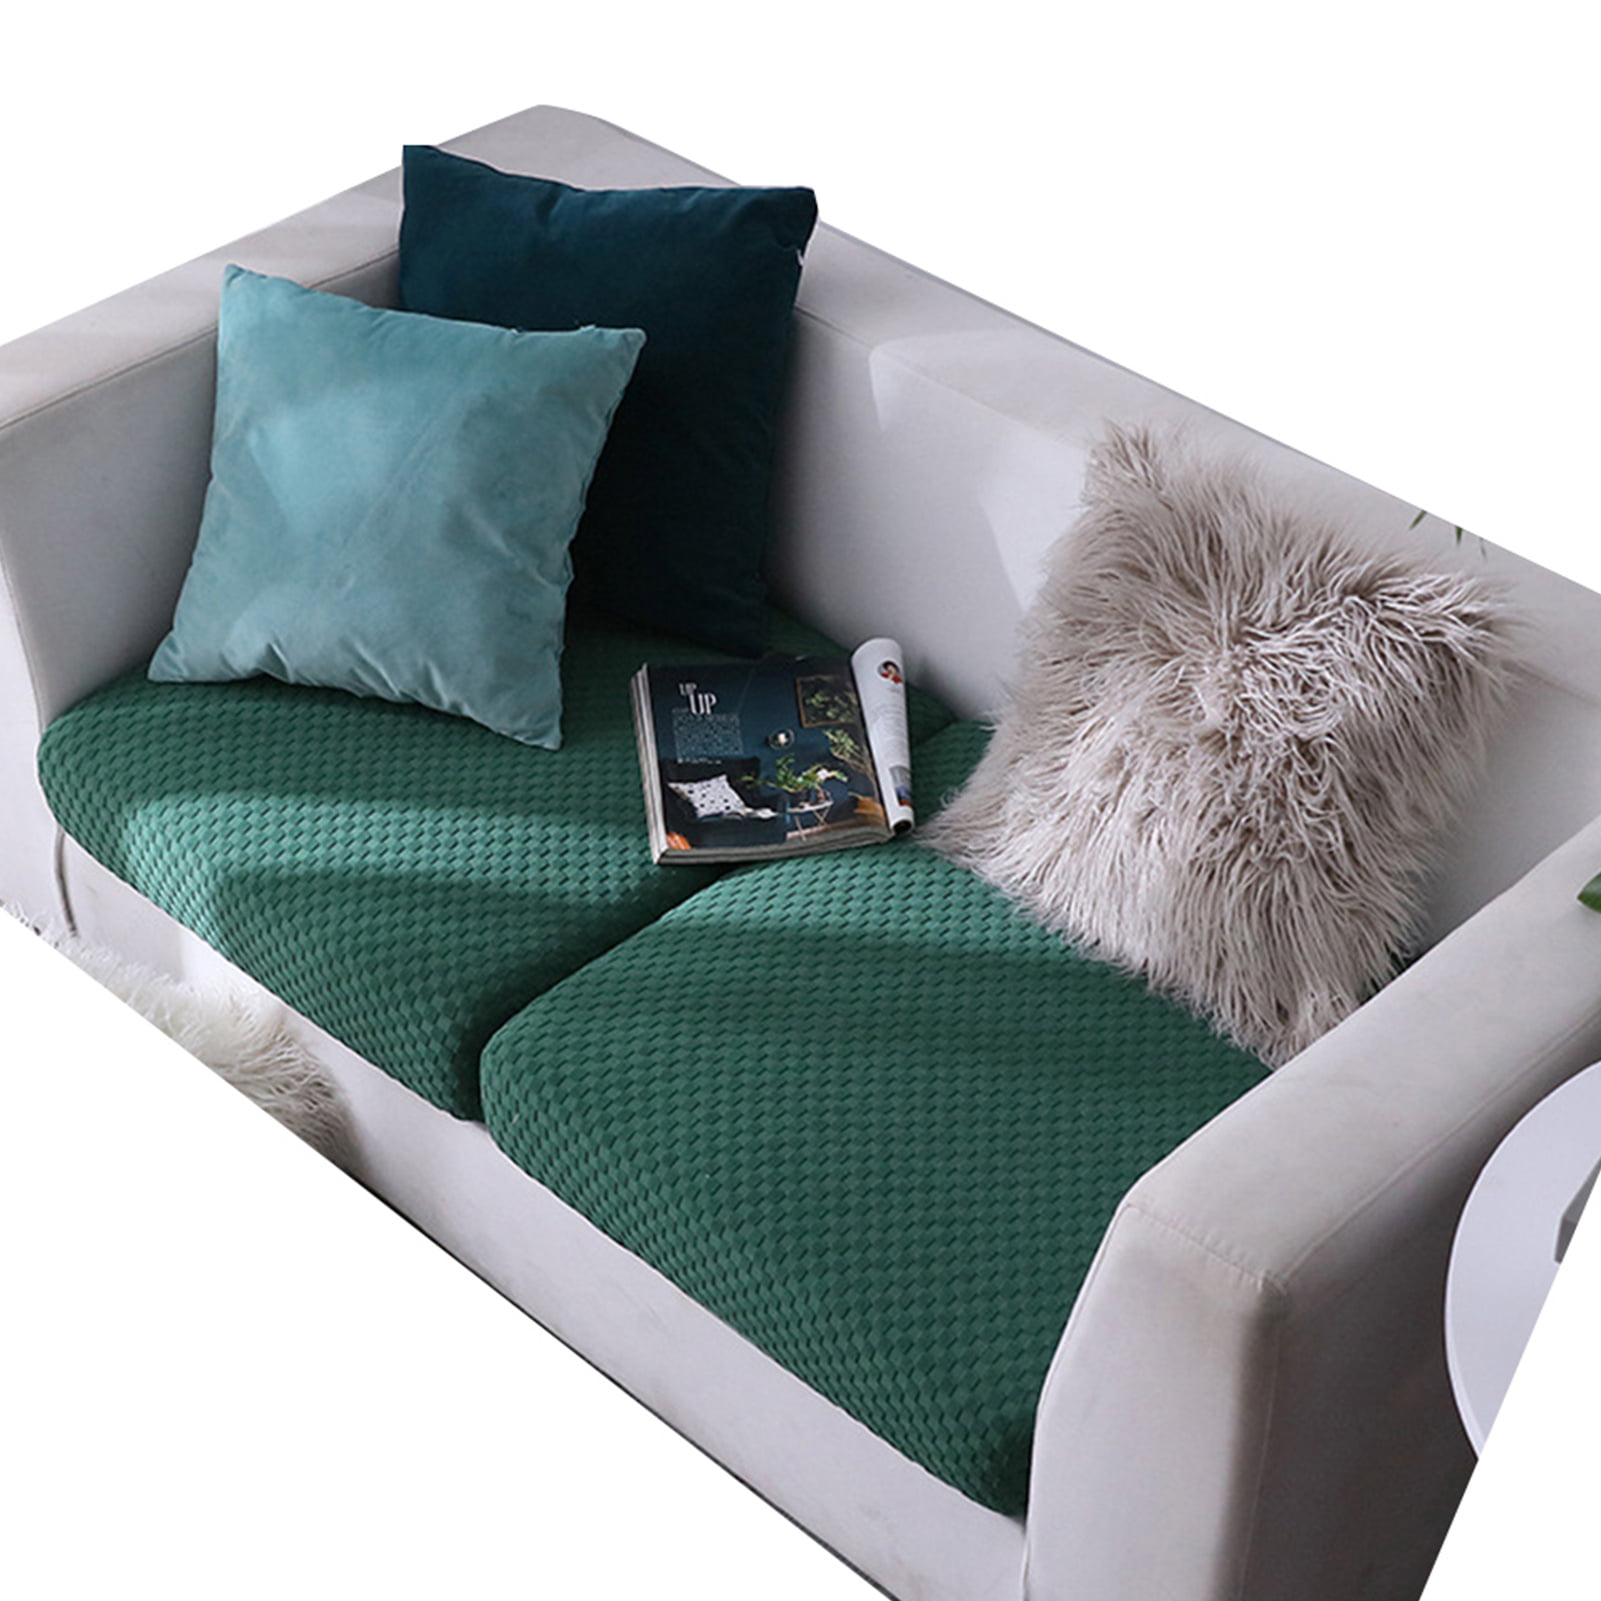 Details about   Replacement Stretch Sofa Seat Cushion Cover Couch Slipcover Furniture Protect. 